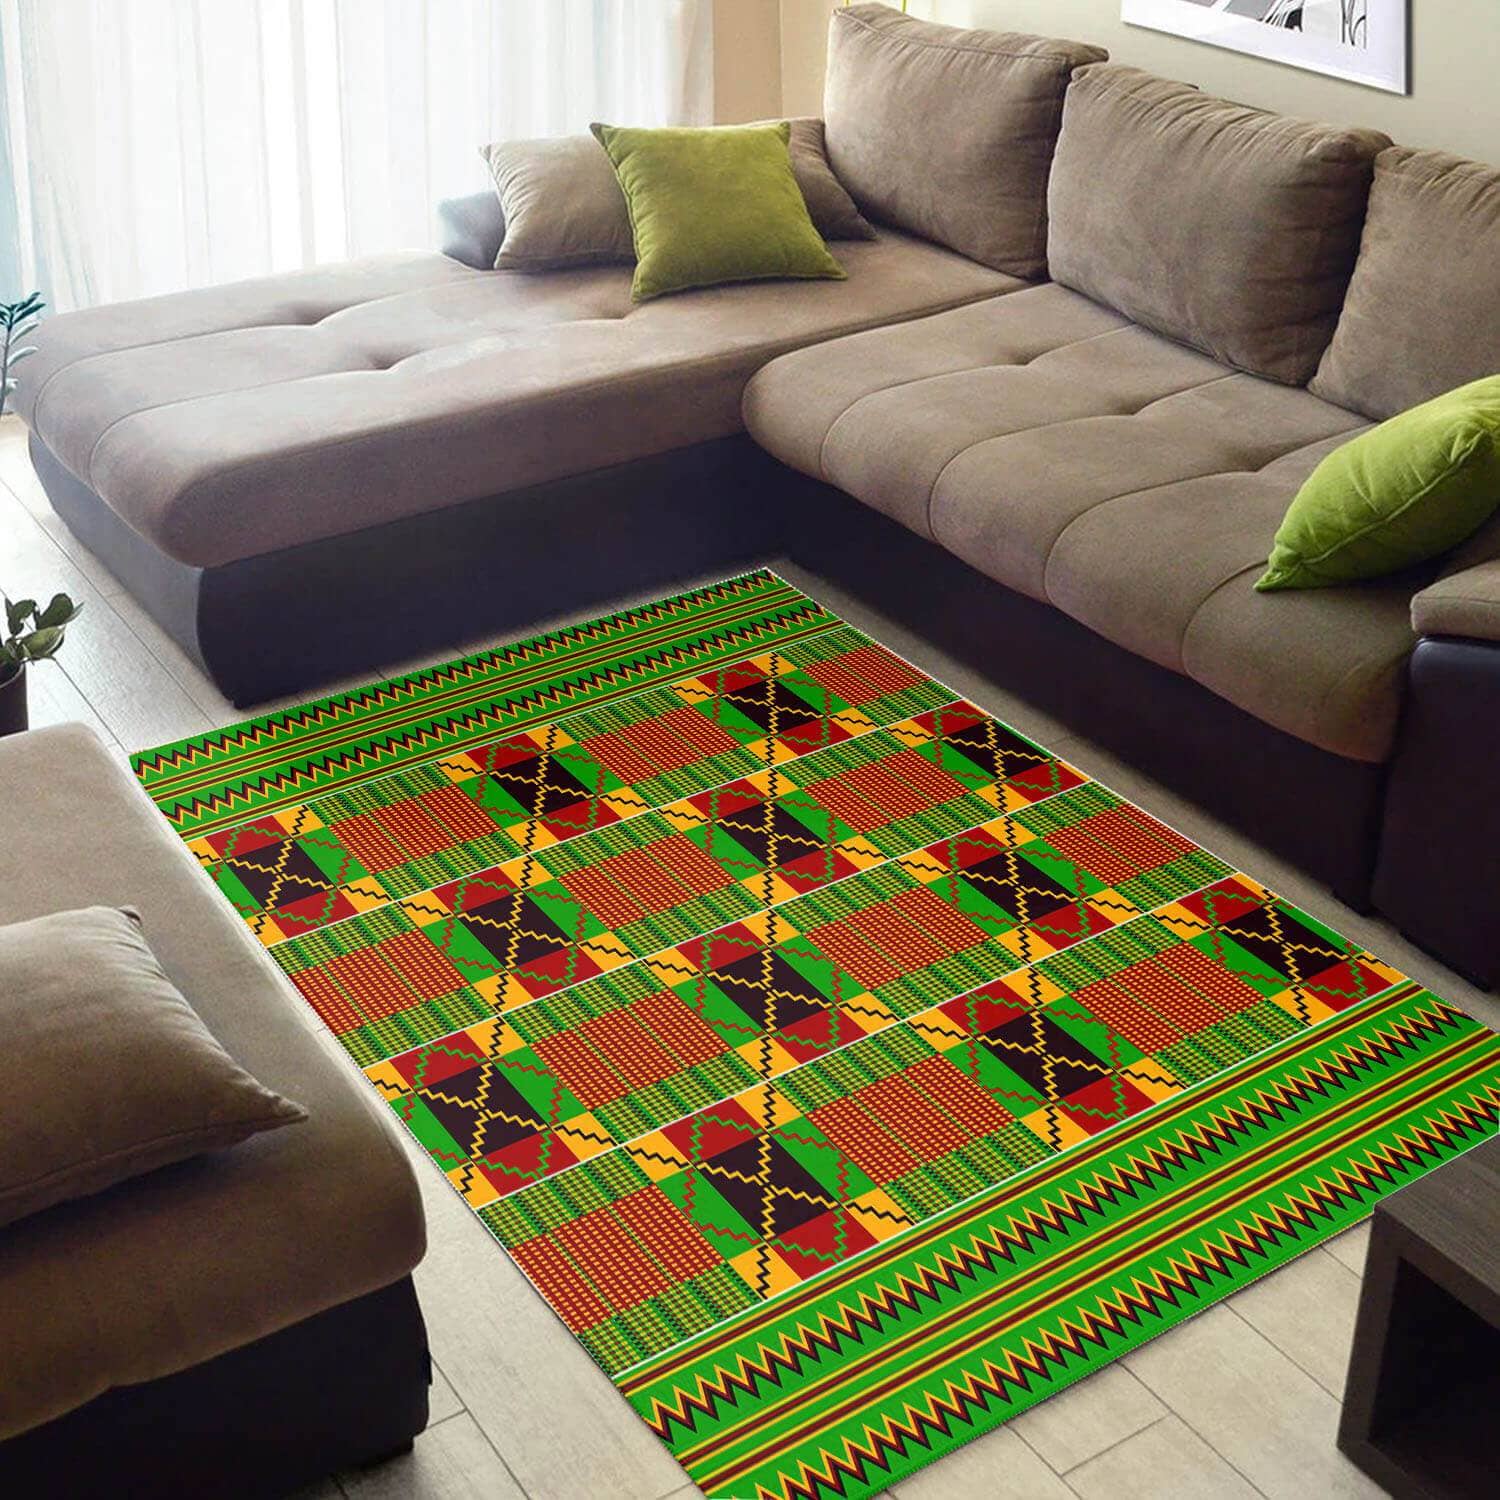 Trendy African Style Graphic American Black Art Afrocentric Carpet House Rug